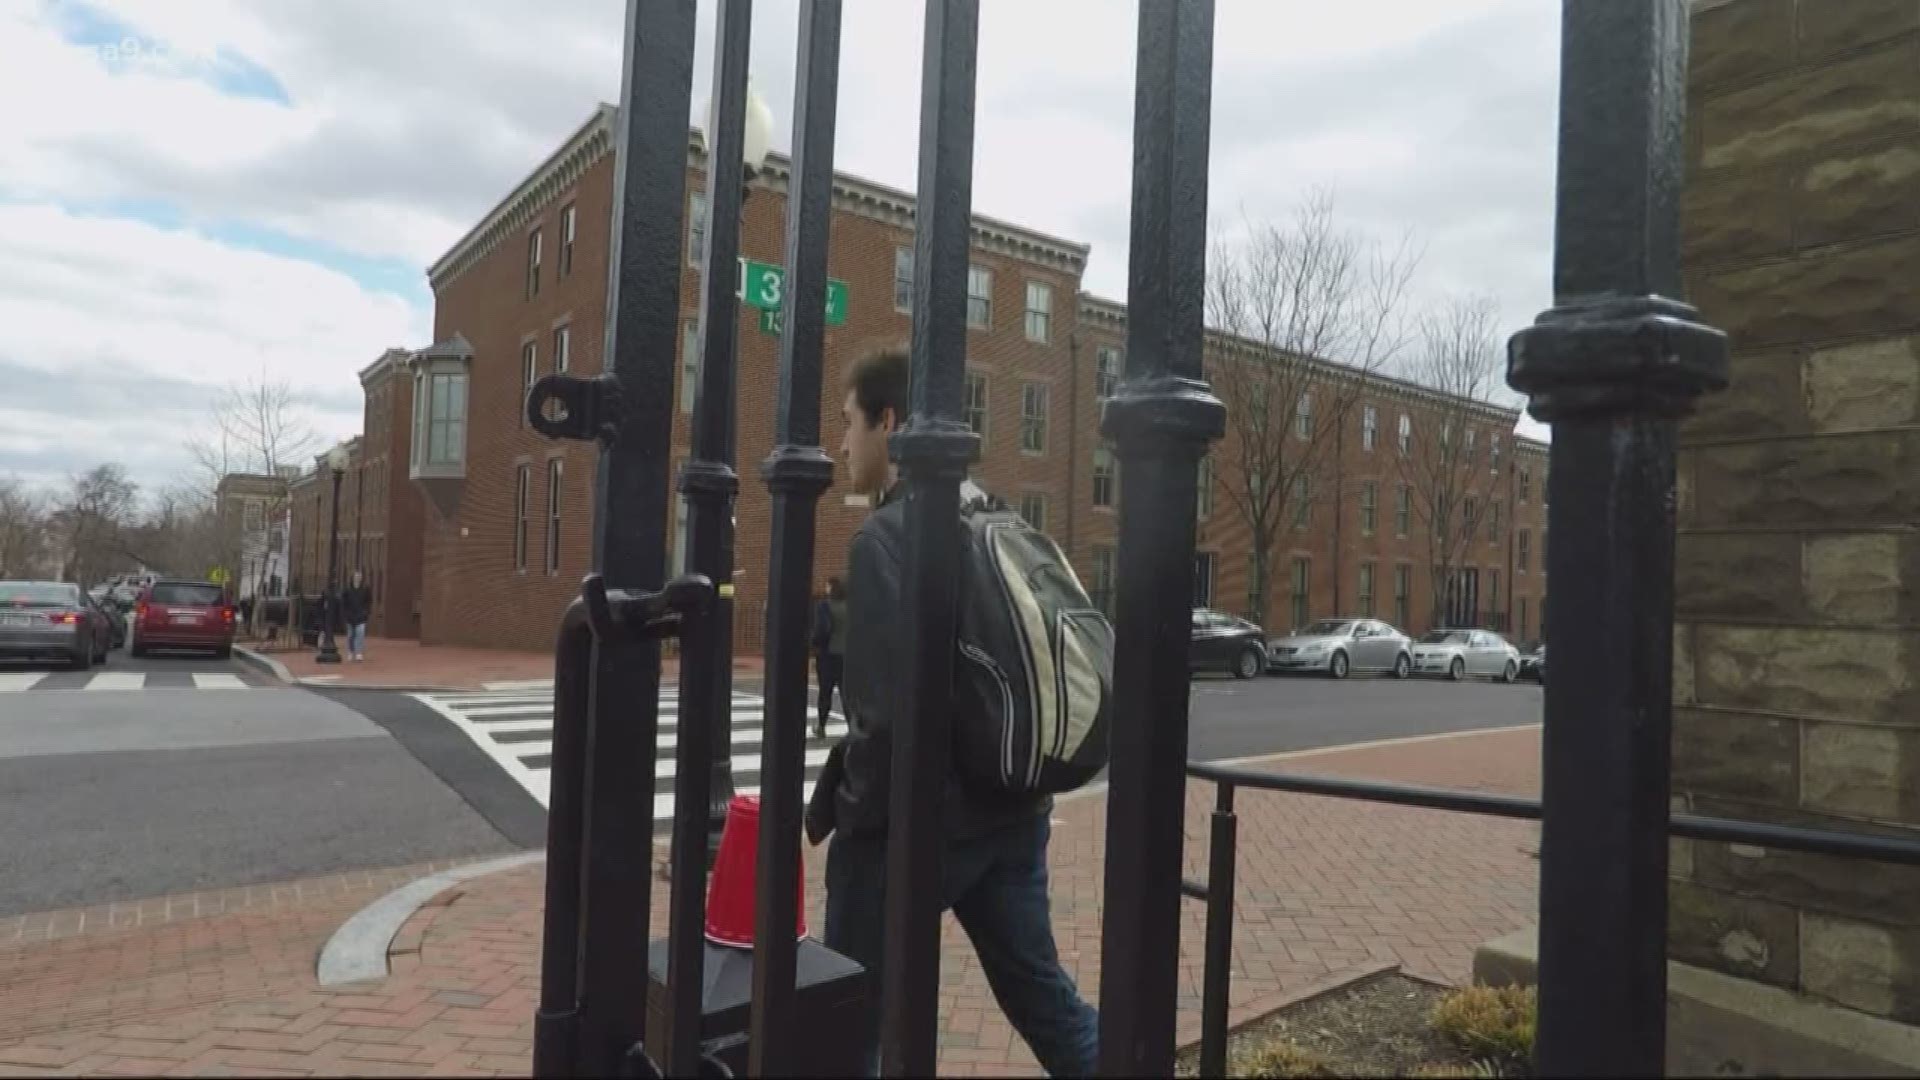 Some students are frustrated because they have been forced to move during midterms.